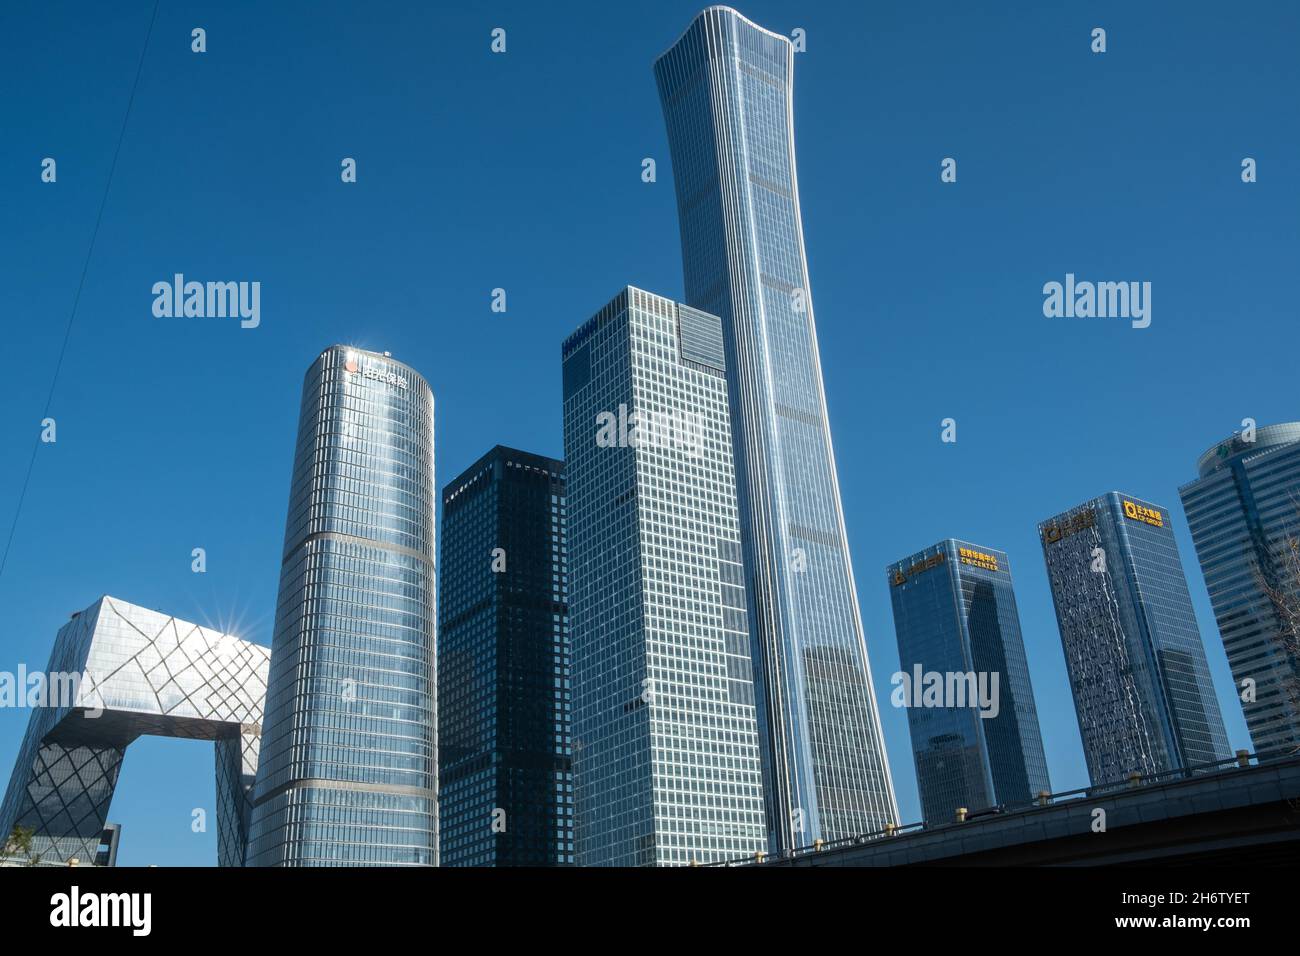 High-rise buildings in Beijing Central Business District (CBD). Stock Photo